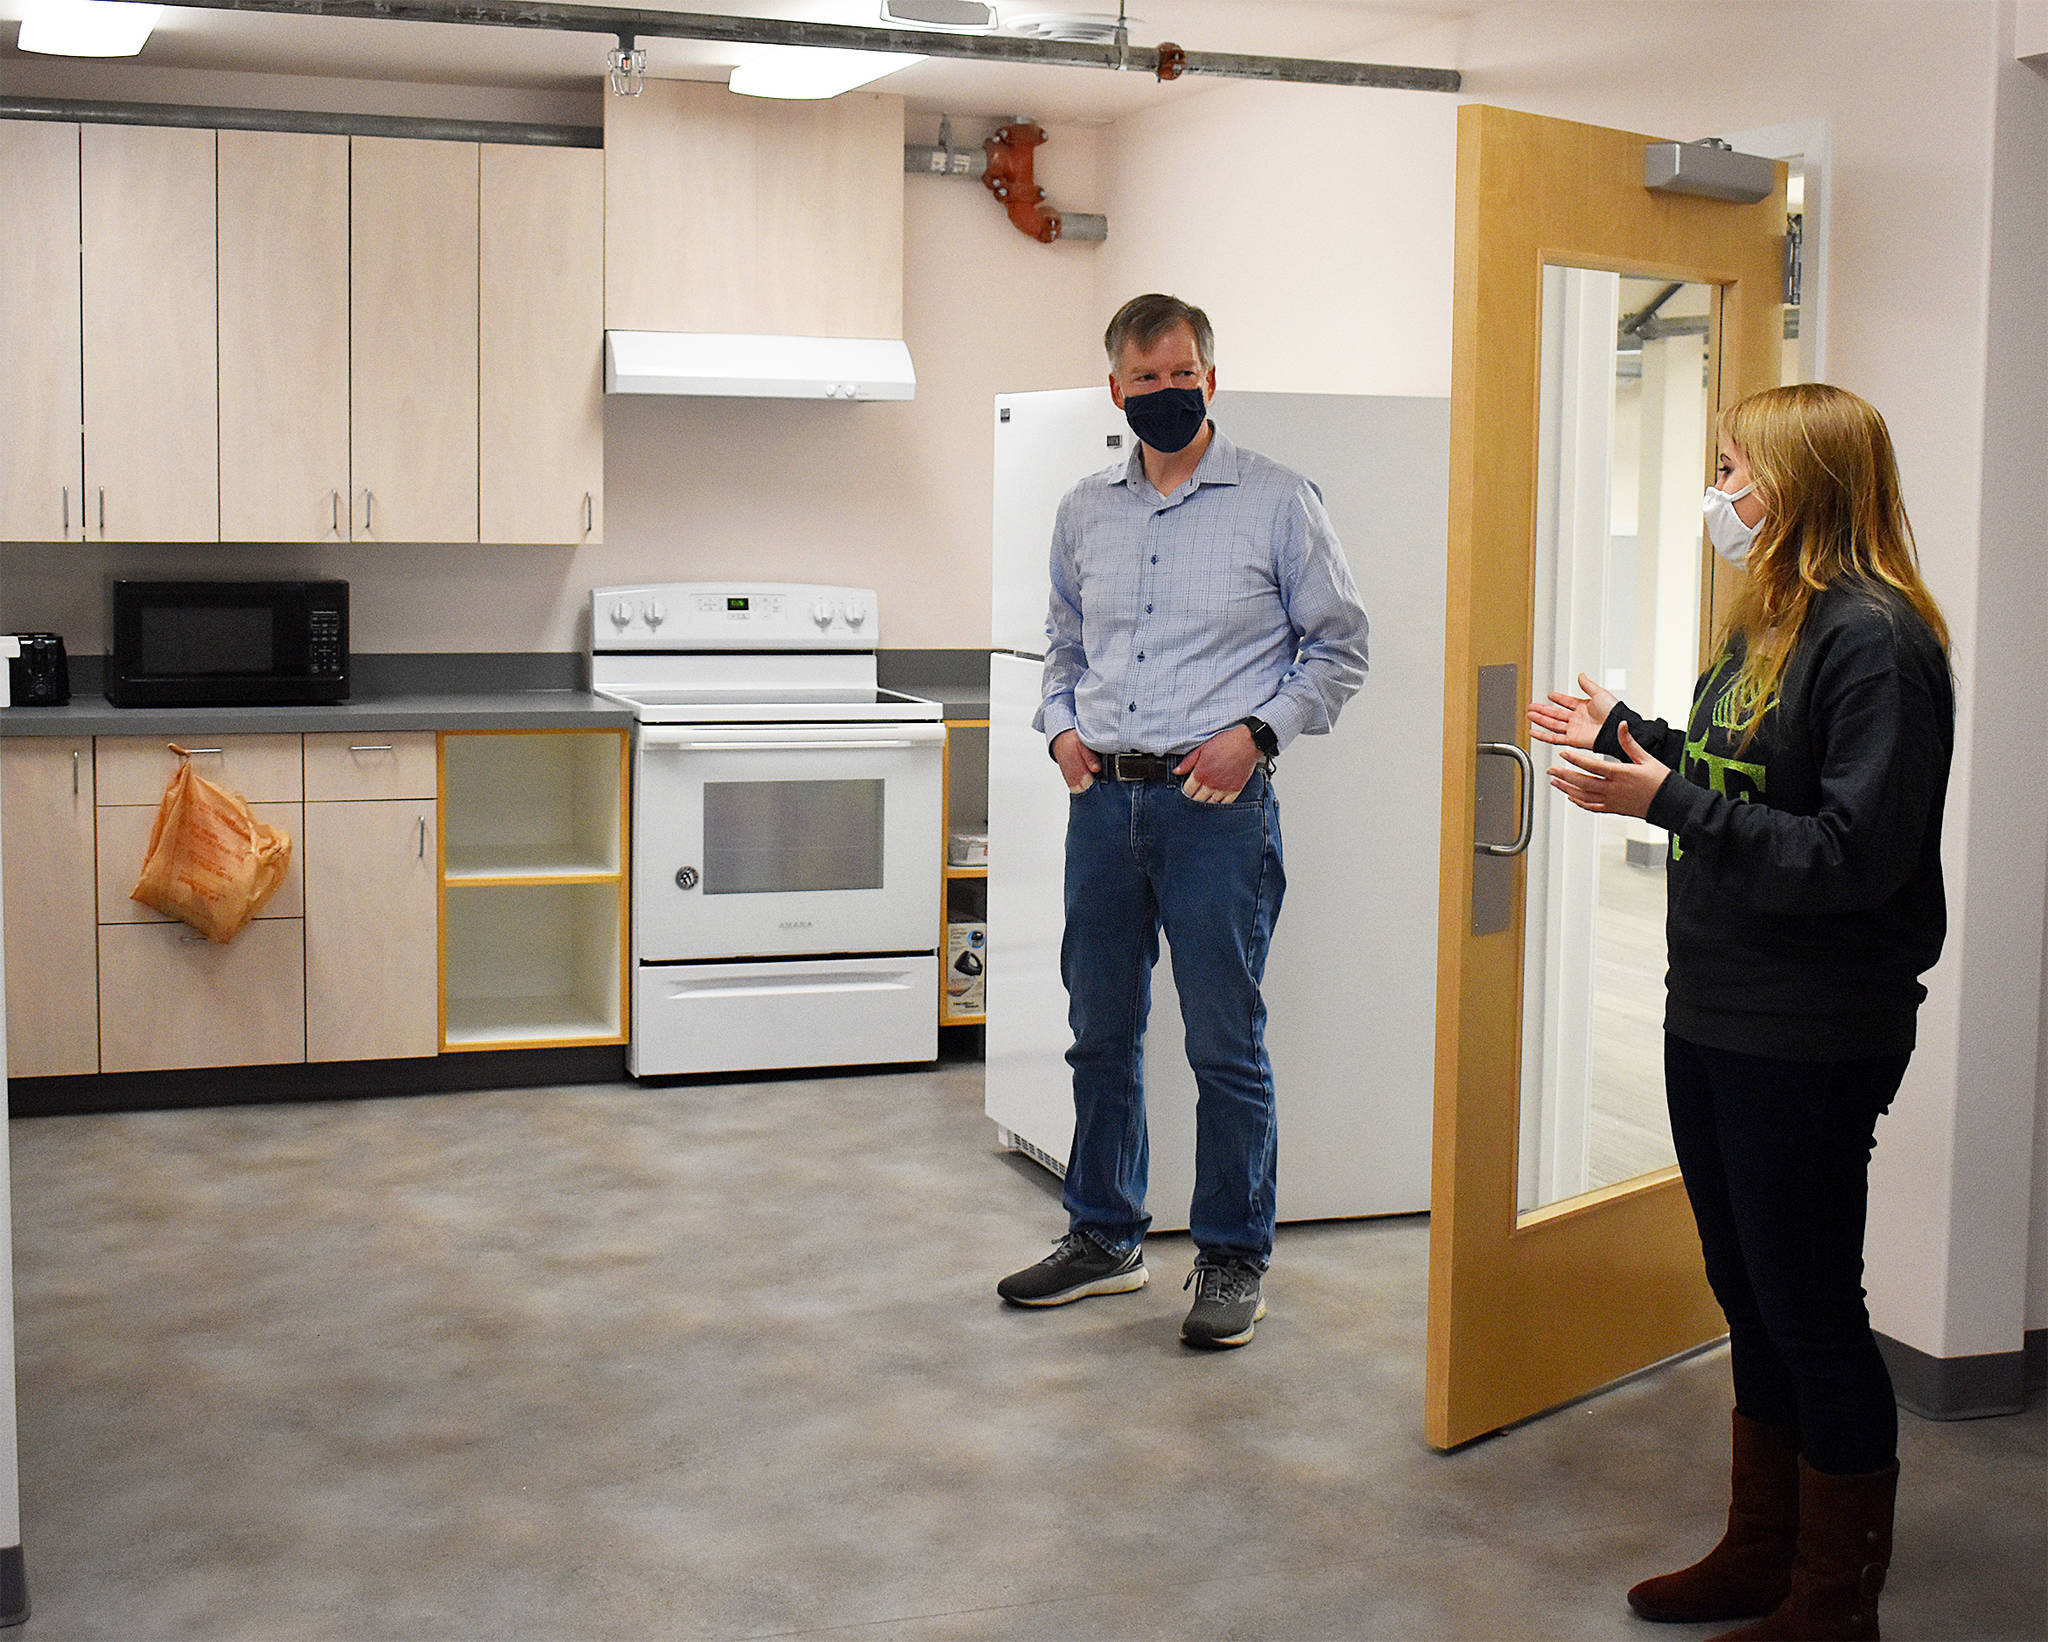 State Rep. Dave Paul, D-Oak Harbor, talks to Boys & Girls Club of Oak Harbor Unit Director Nikki Barone about some of the new ways the club will be able to teach kids kitchen skills in its new location on Ely Street. Photo by Emily Gilbert/Whidbey News-Times